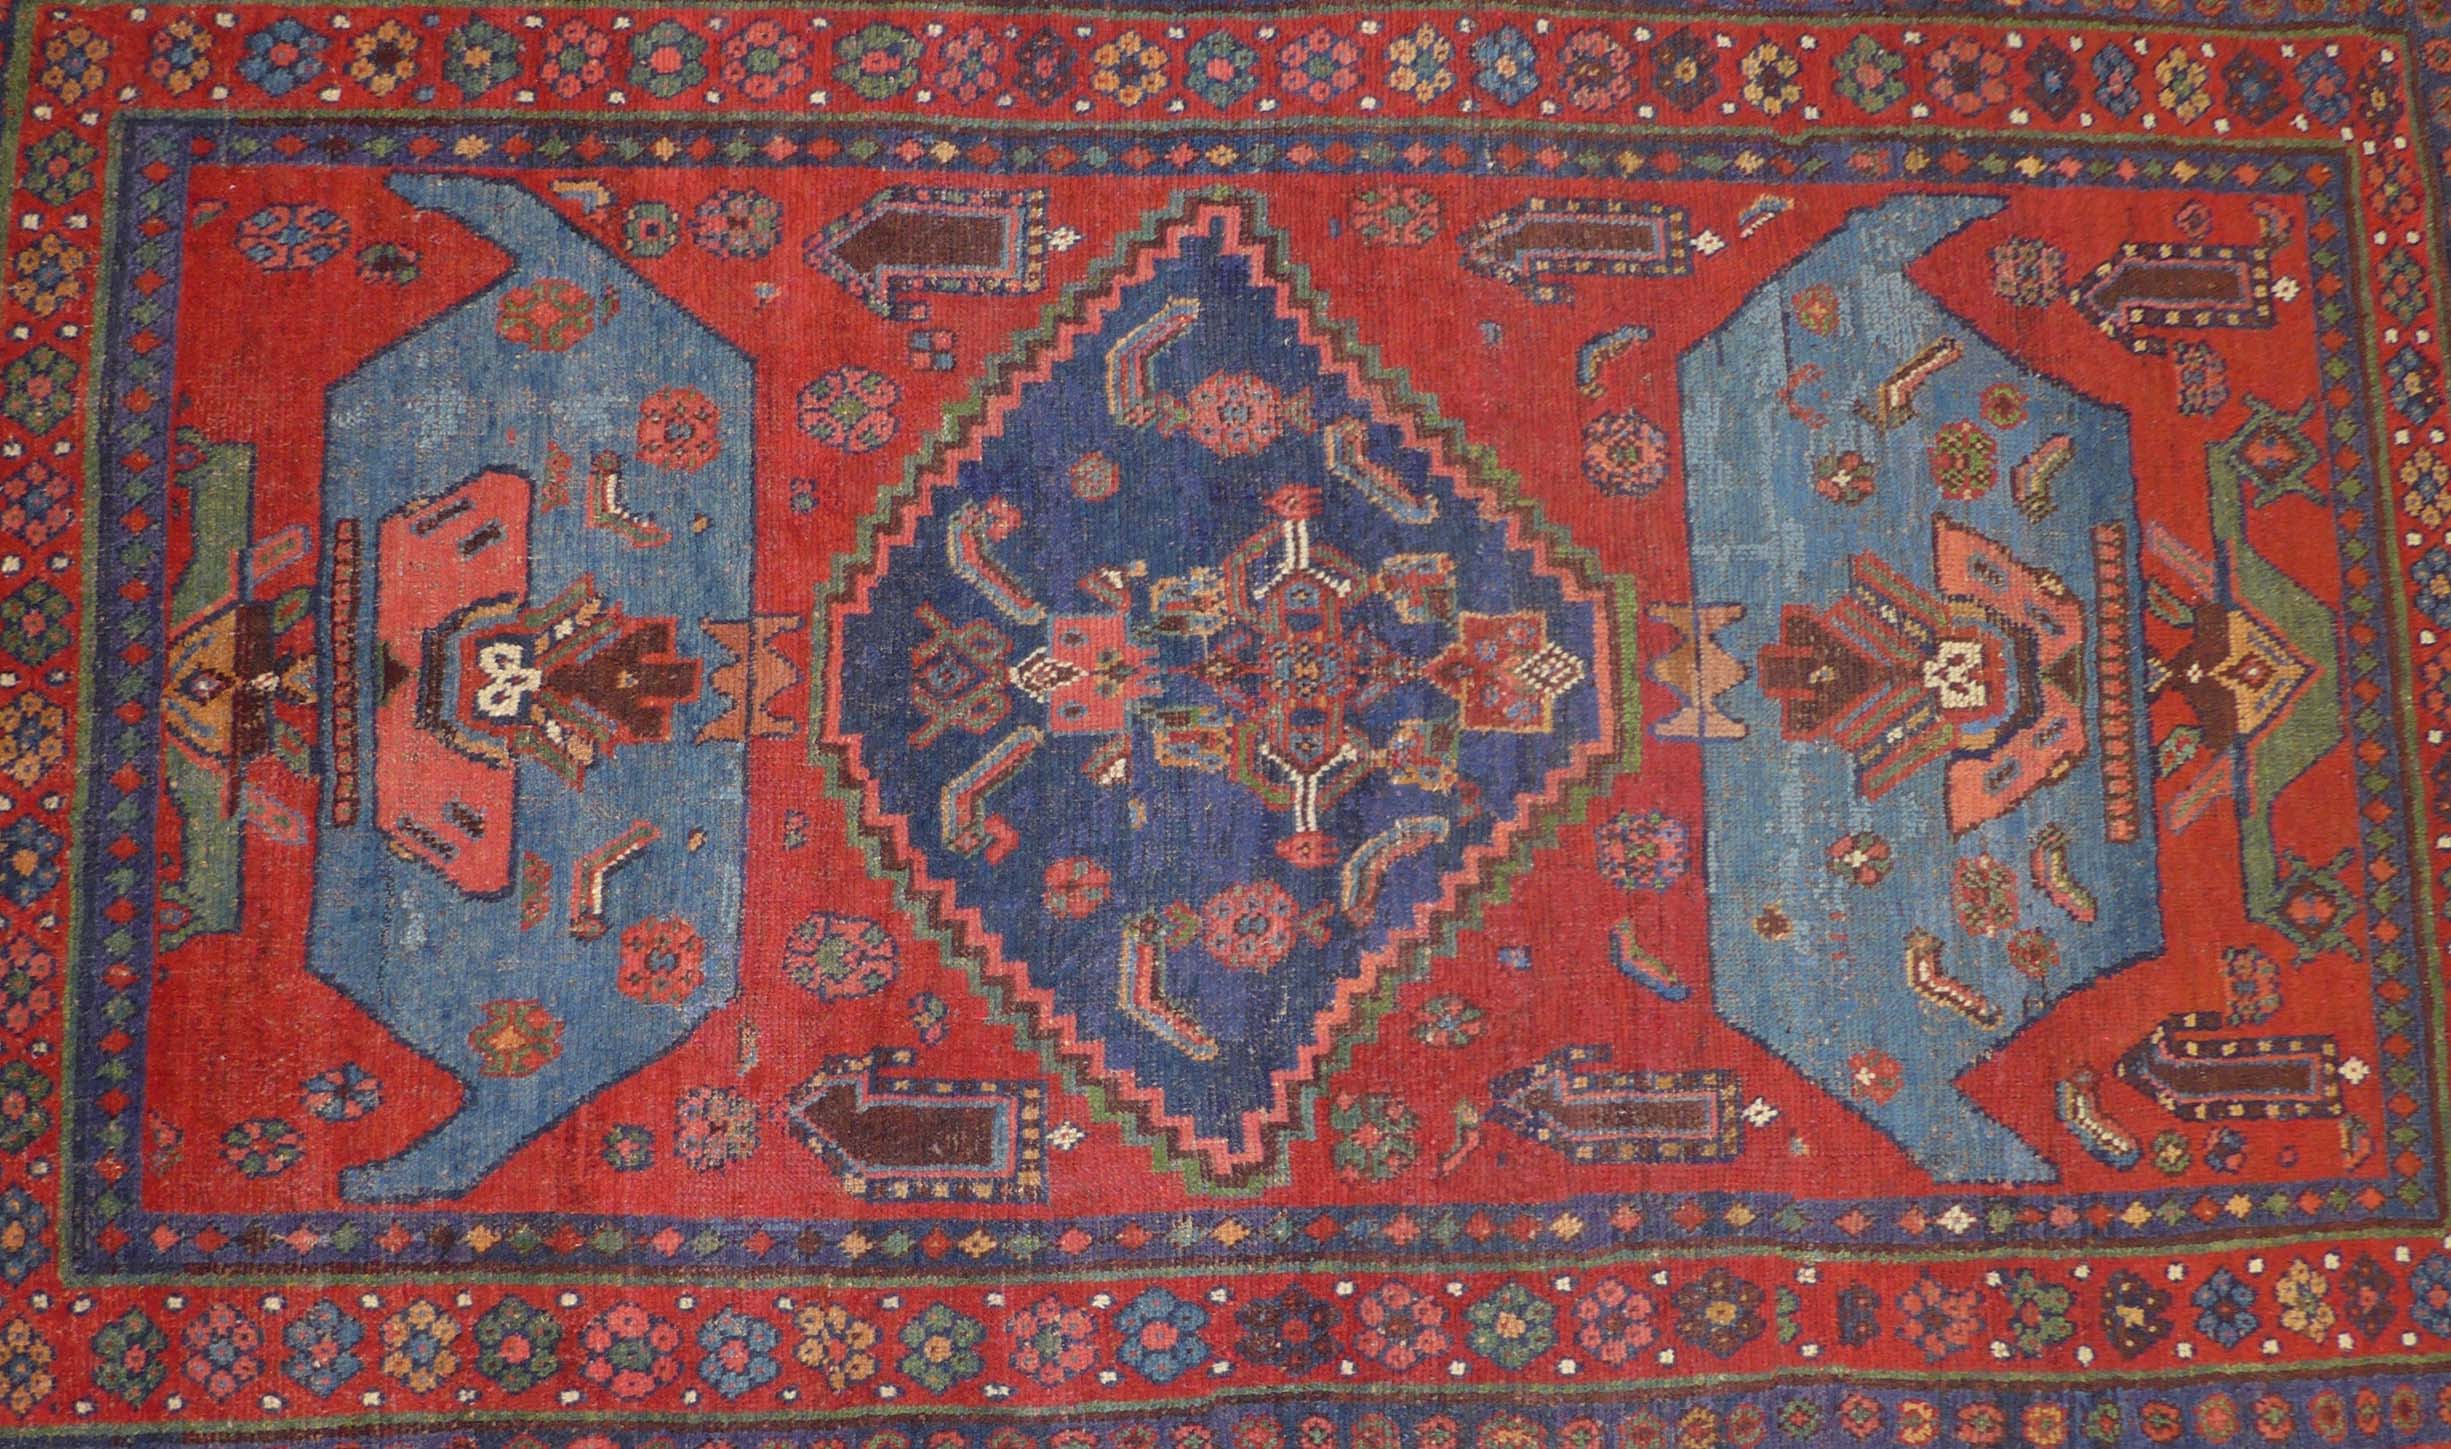 An early 20th century Persian Kurdish rug, on a mainly red ground, the central panel with